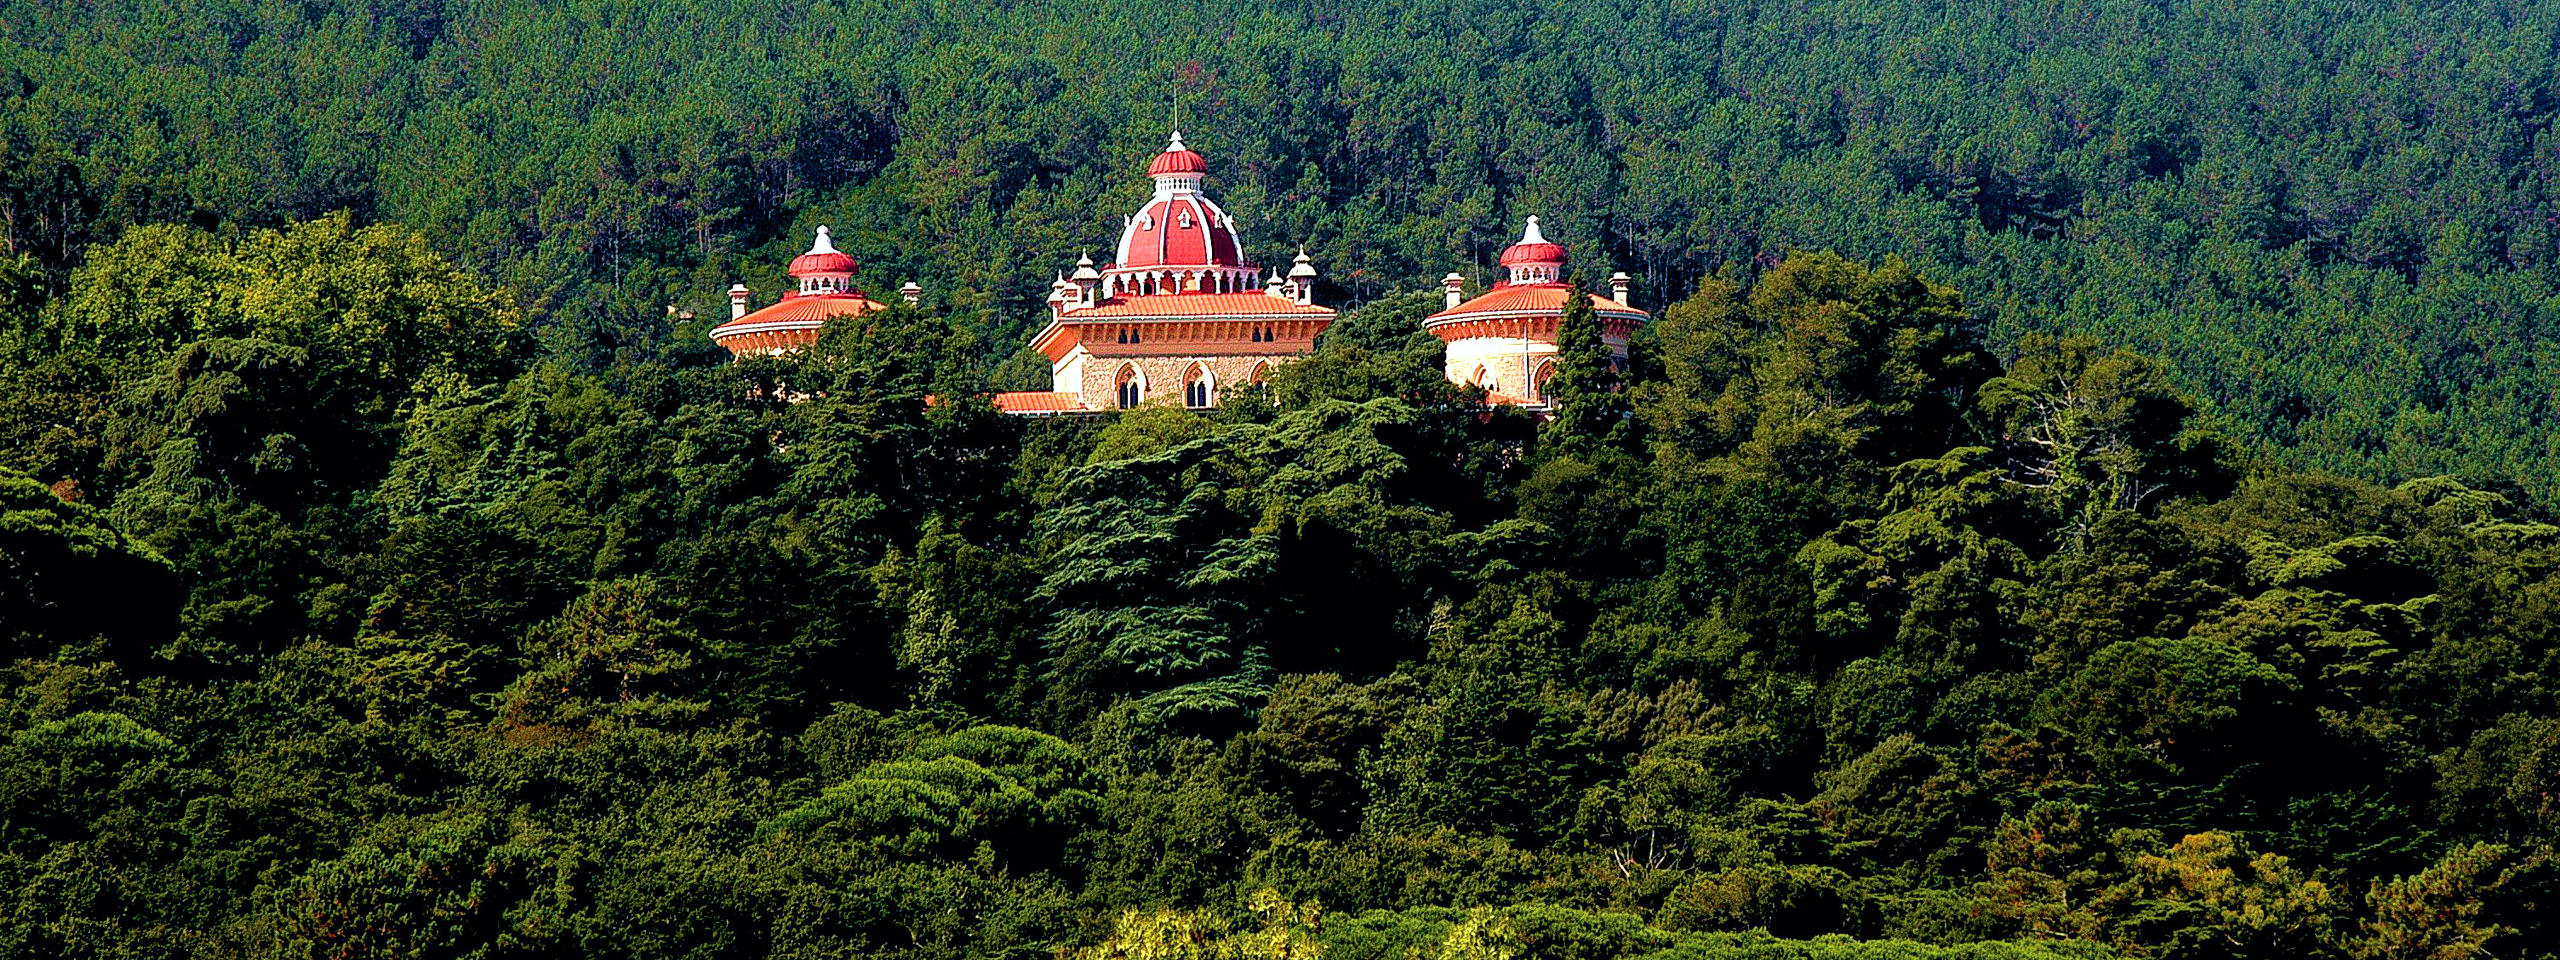 Monserrate Palace immerged in the forest